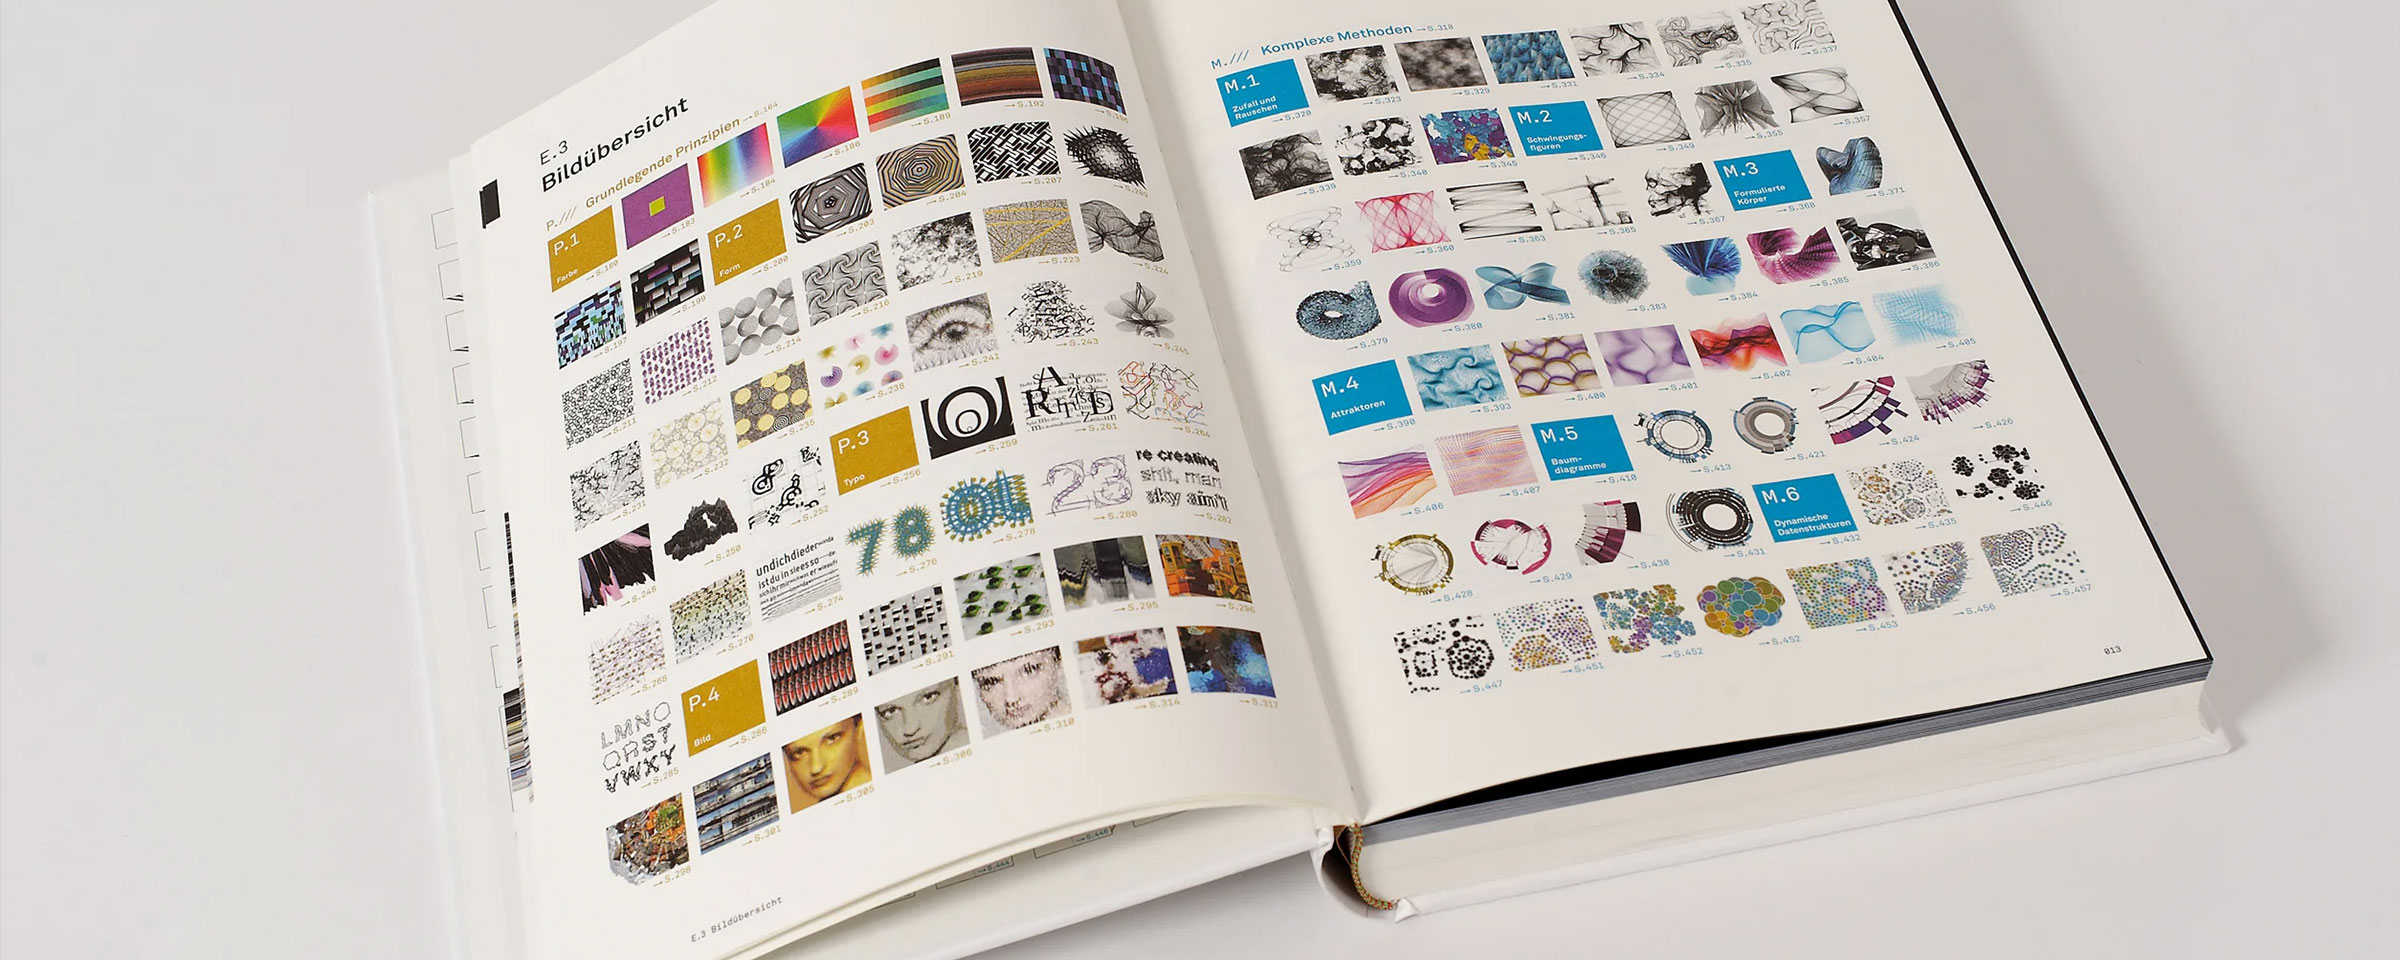 Generative Gestaltung book with the overview page open